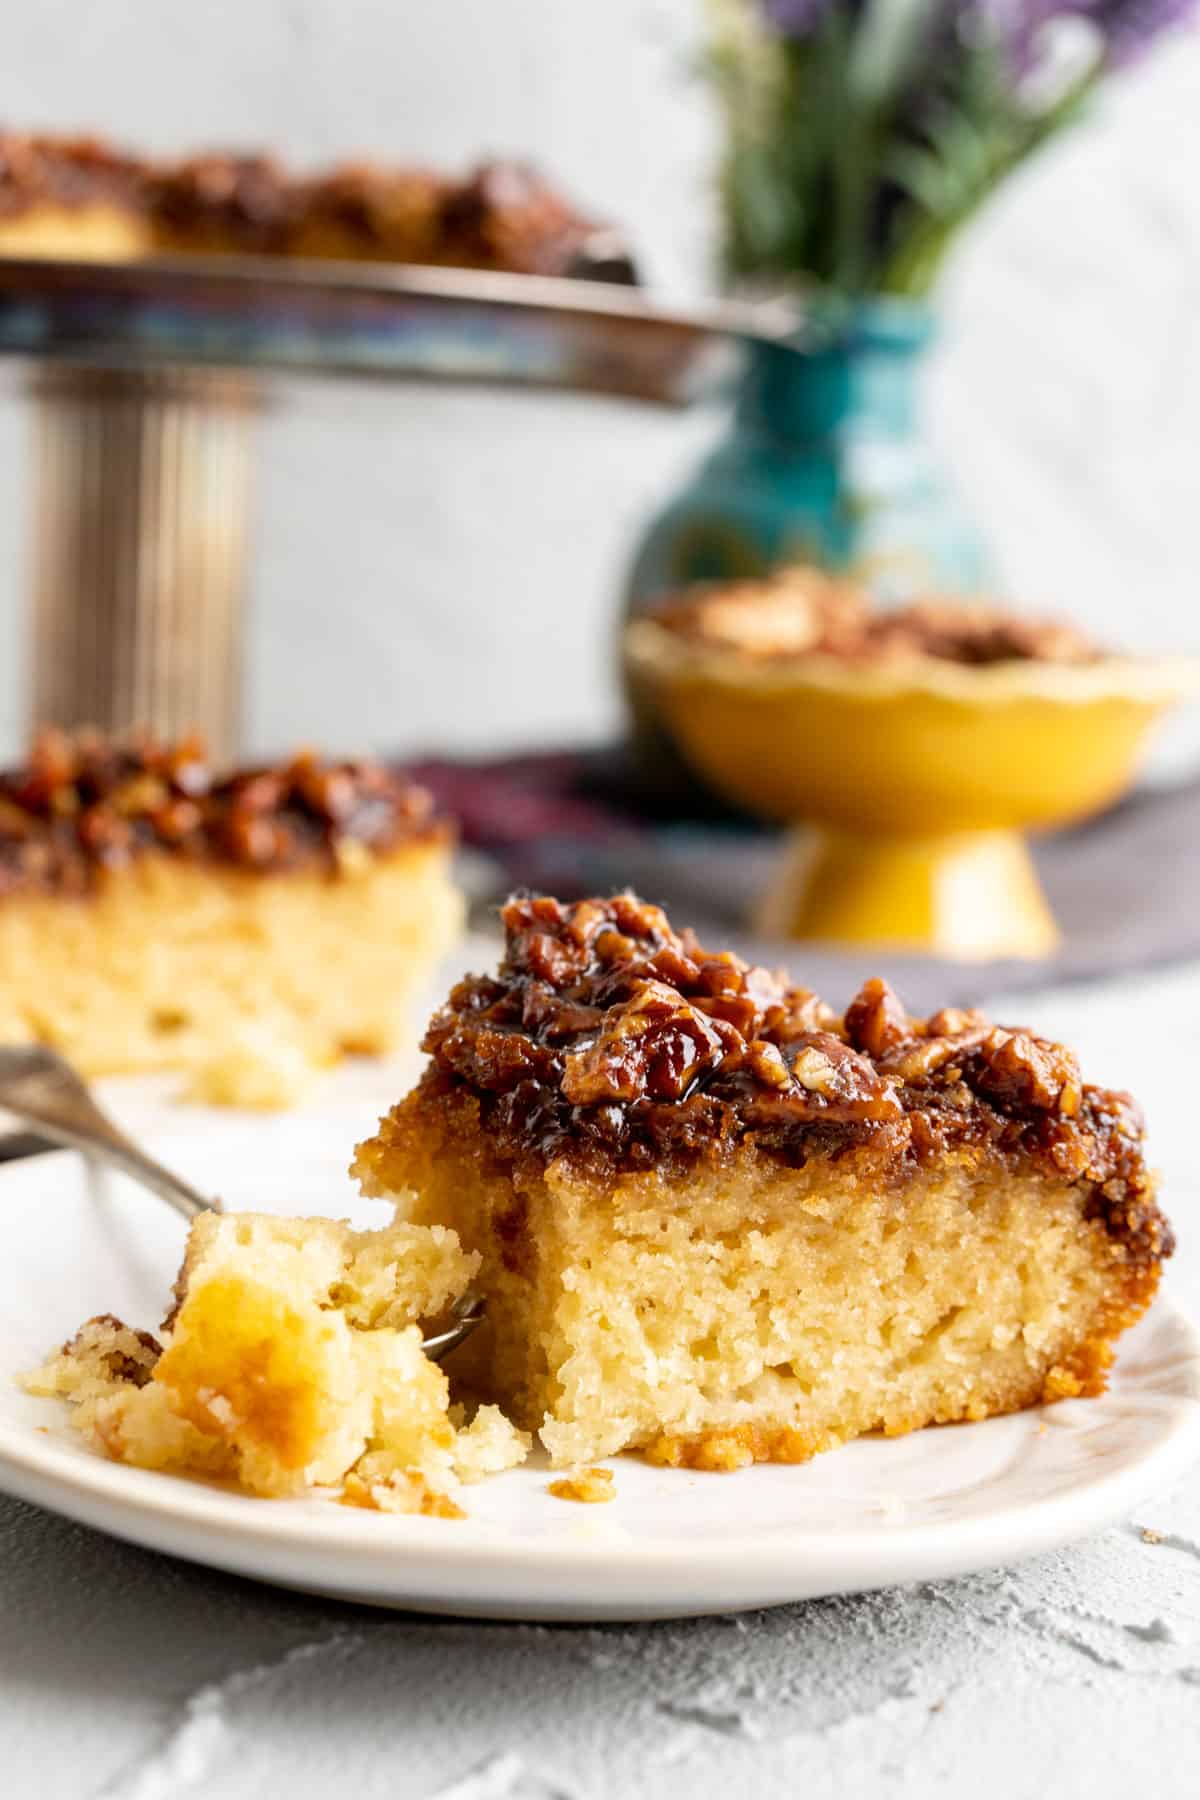 Slice of pecan upside down cake in a small white plate with a cake stand in the backdrop.